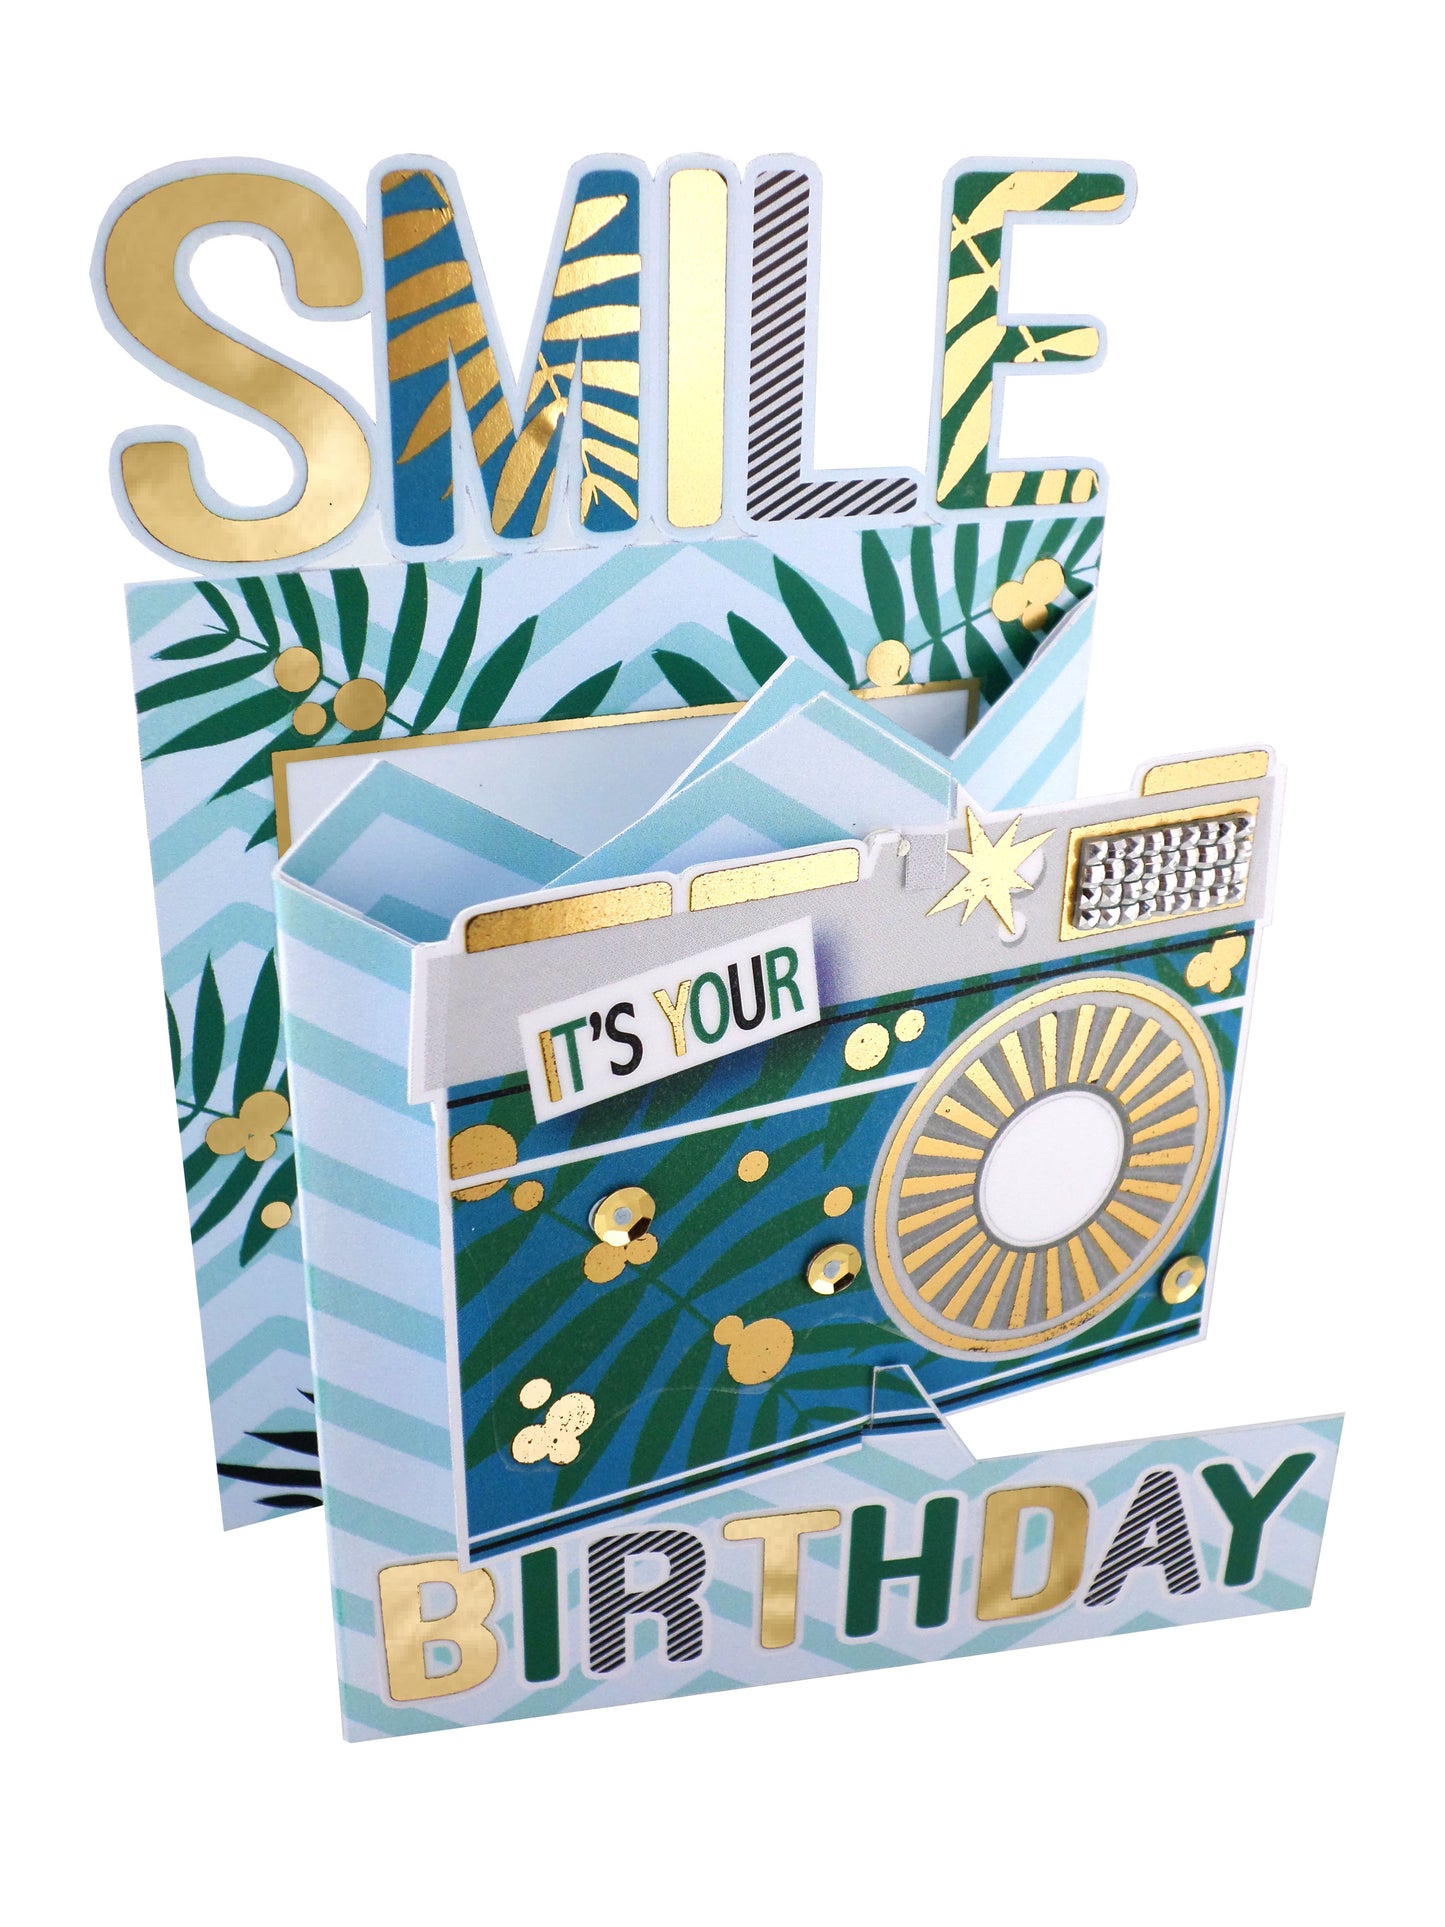 Smile It's Your Birthday 3D Cutting Edge Birthday Card